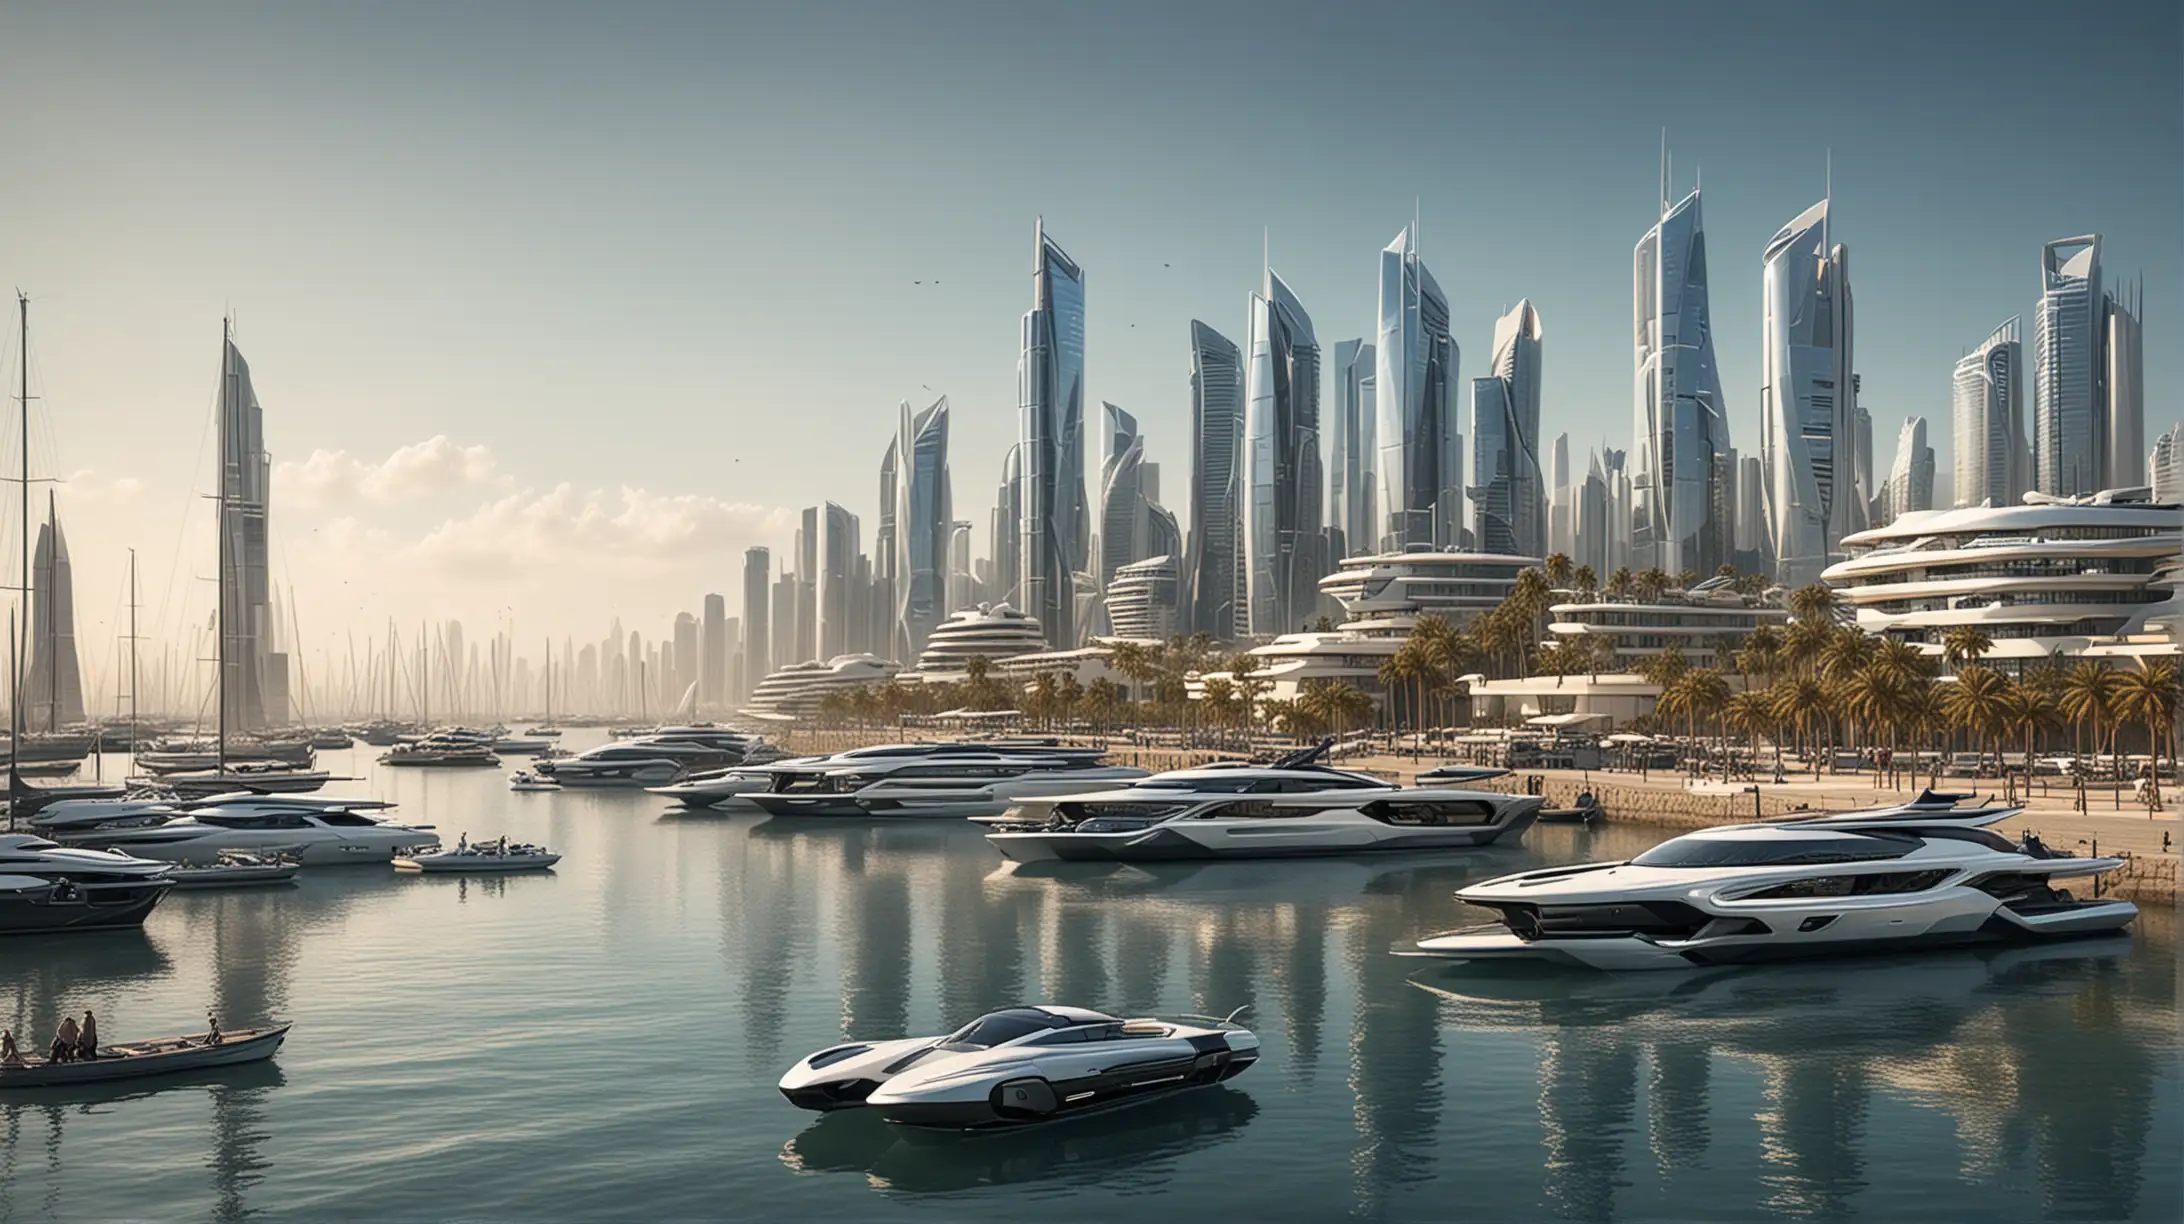 Futuristic Marina Cityscape with Electric Mobility Vehicles and Boats